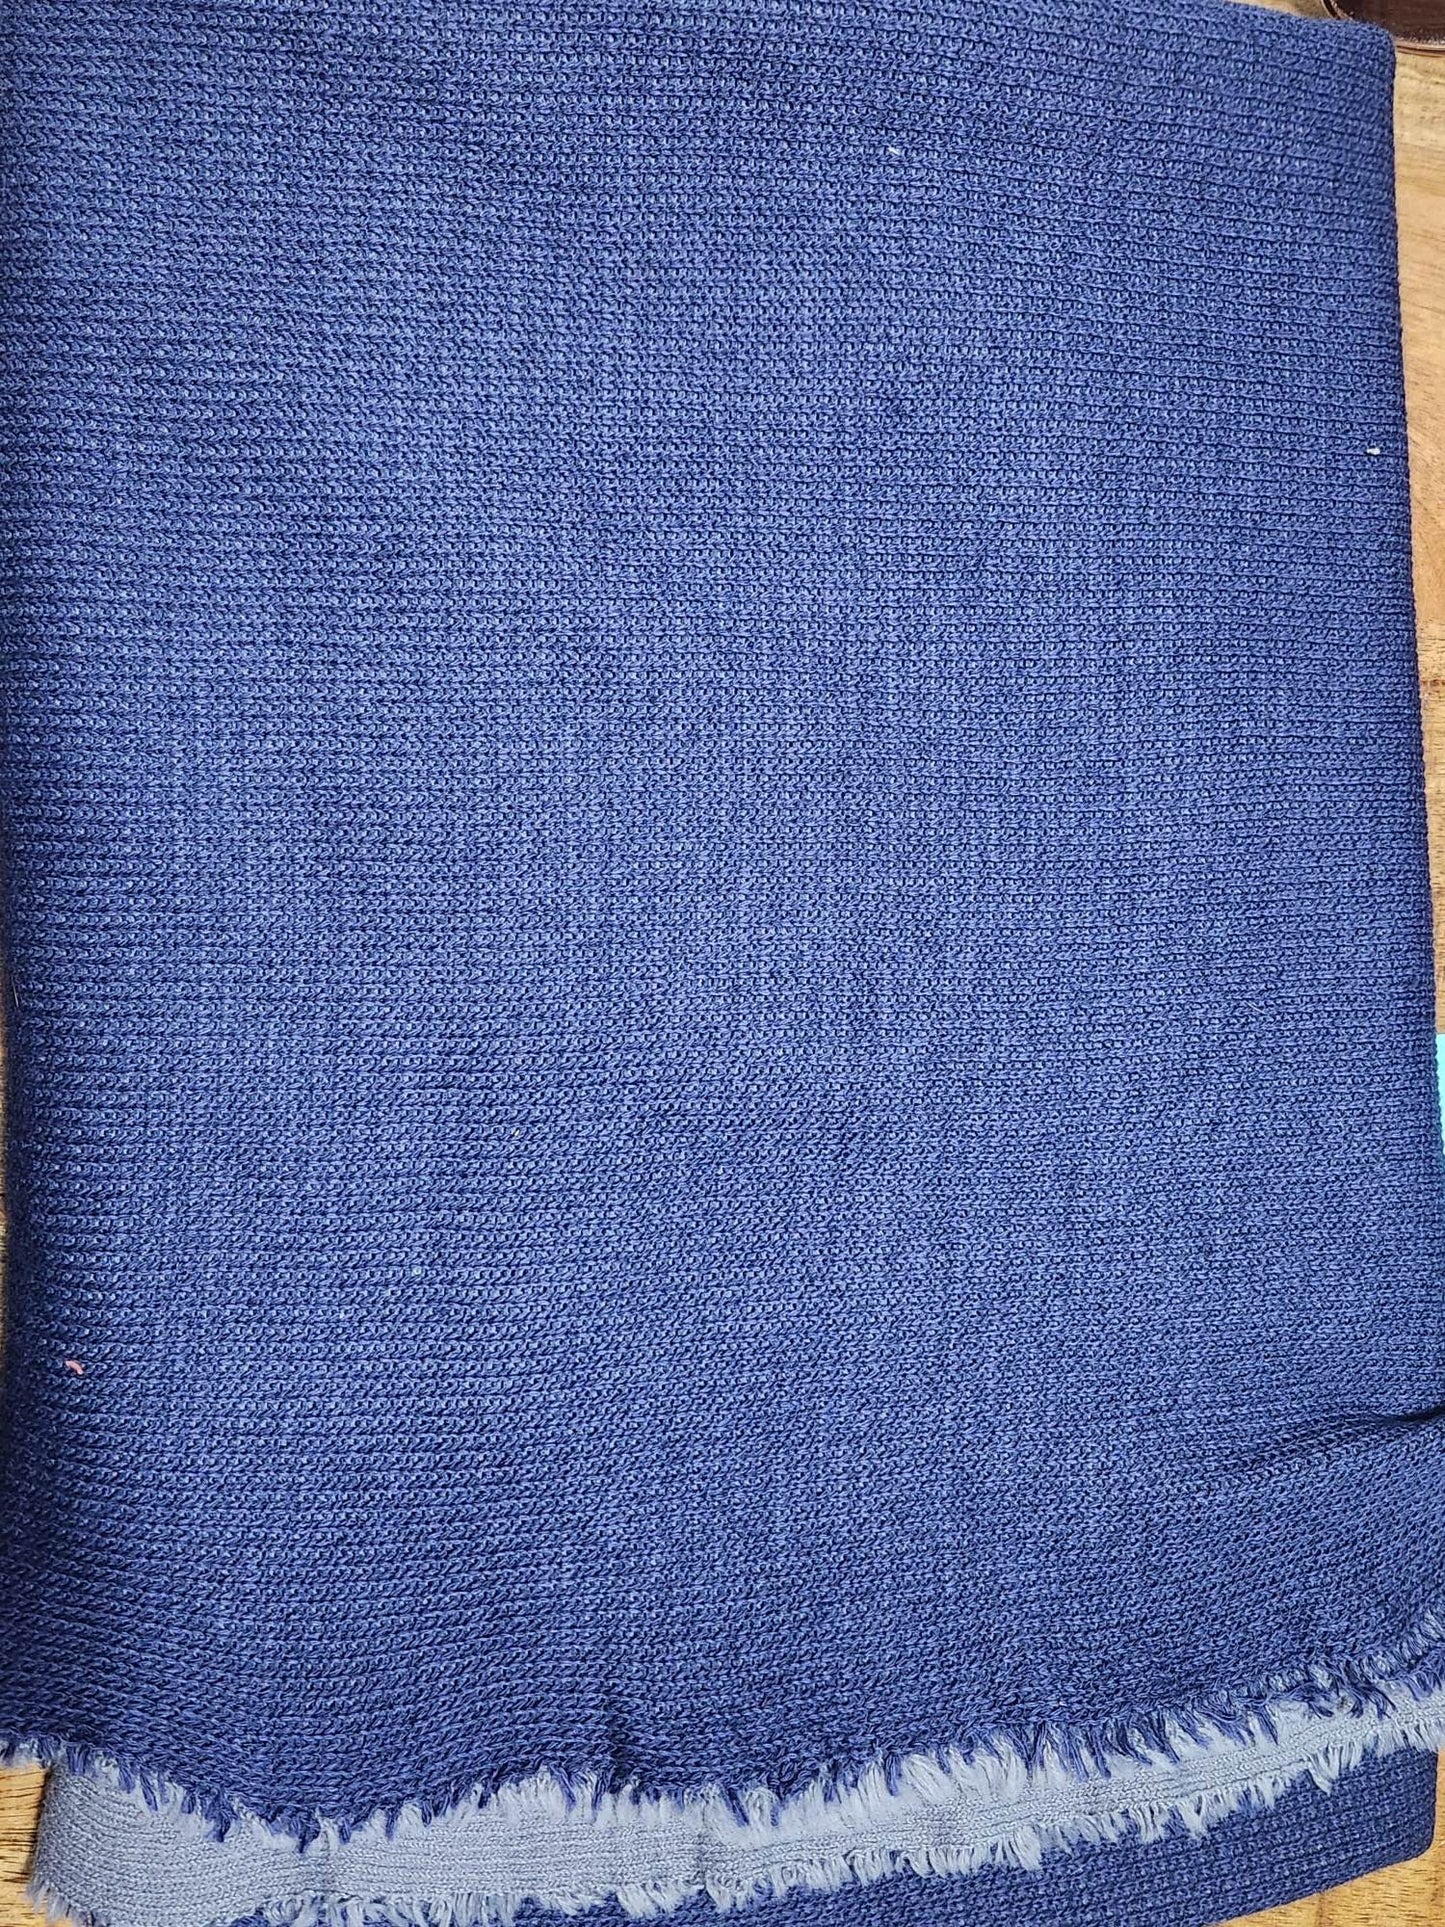 Remnant Euro Sweater Knit - Blue **87cm**